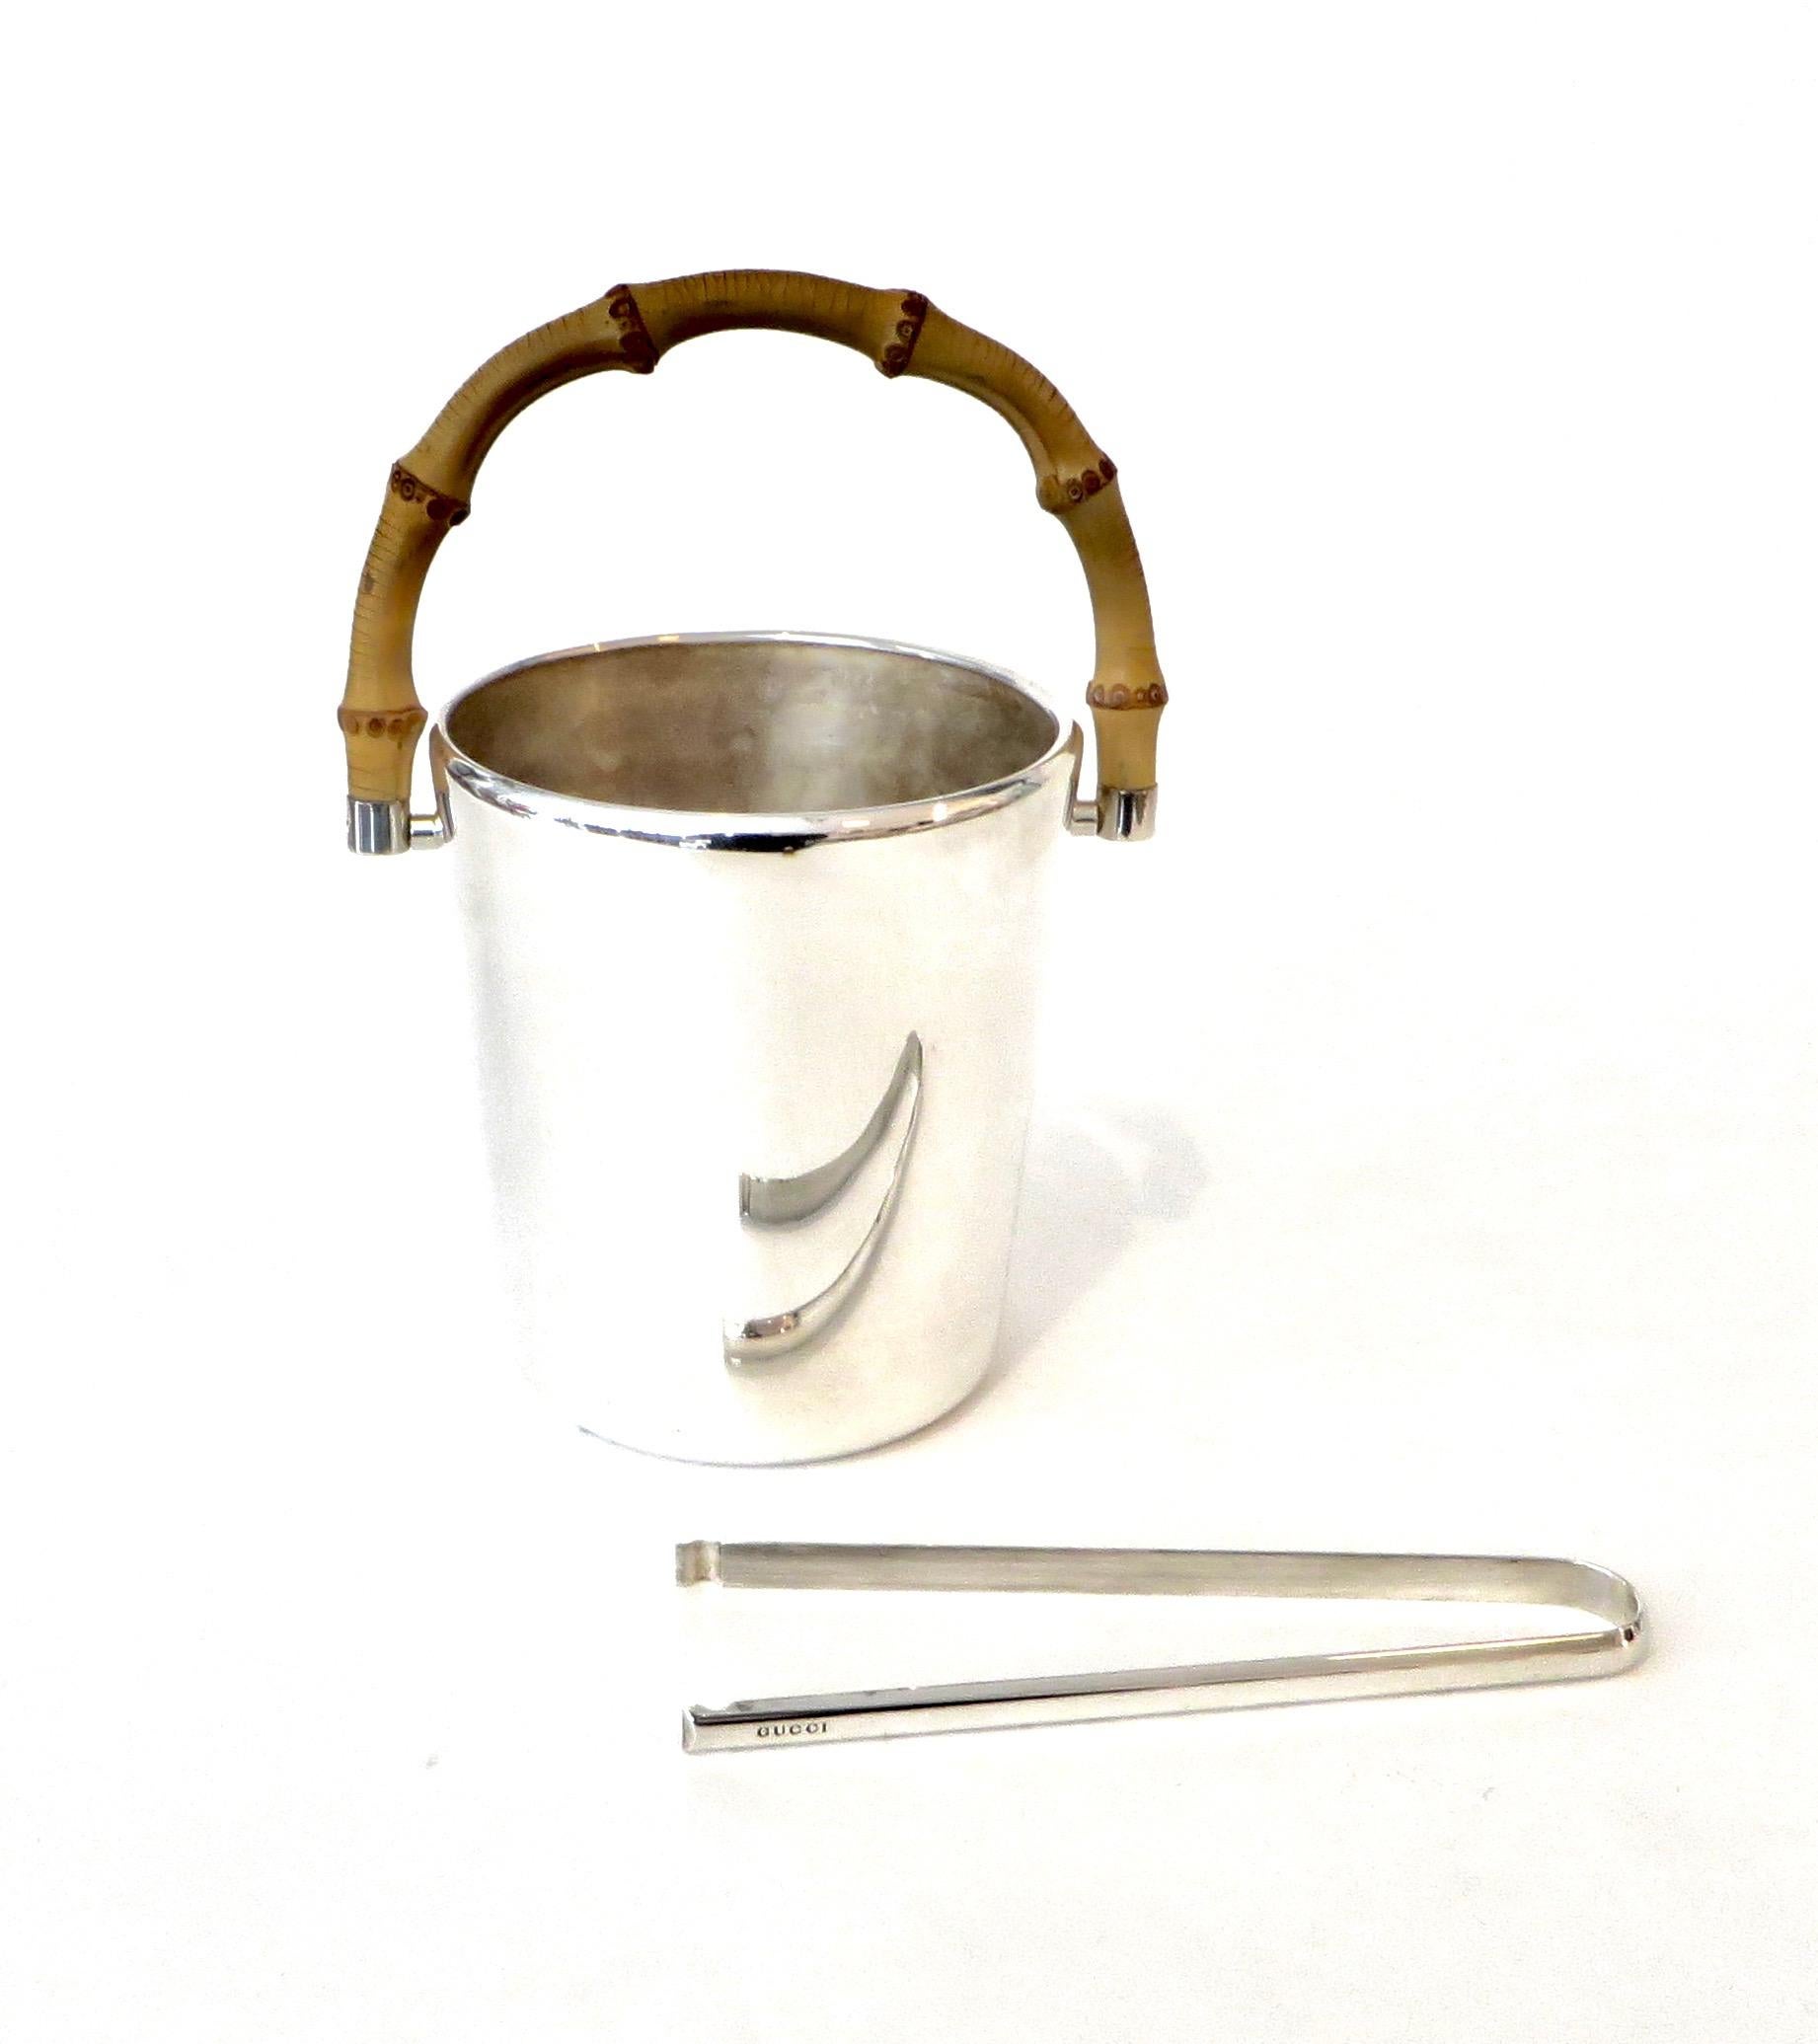 A silver plate with bamboo handle Gucci made in Italy ice bucket with ice tongs.
Both ice bucket and ice tongs stamped Gucci. The ice bucket is also stamped Made in Italy.
Excellent condition with no scratches on the bucket. The bottom does show